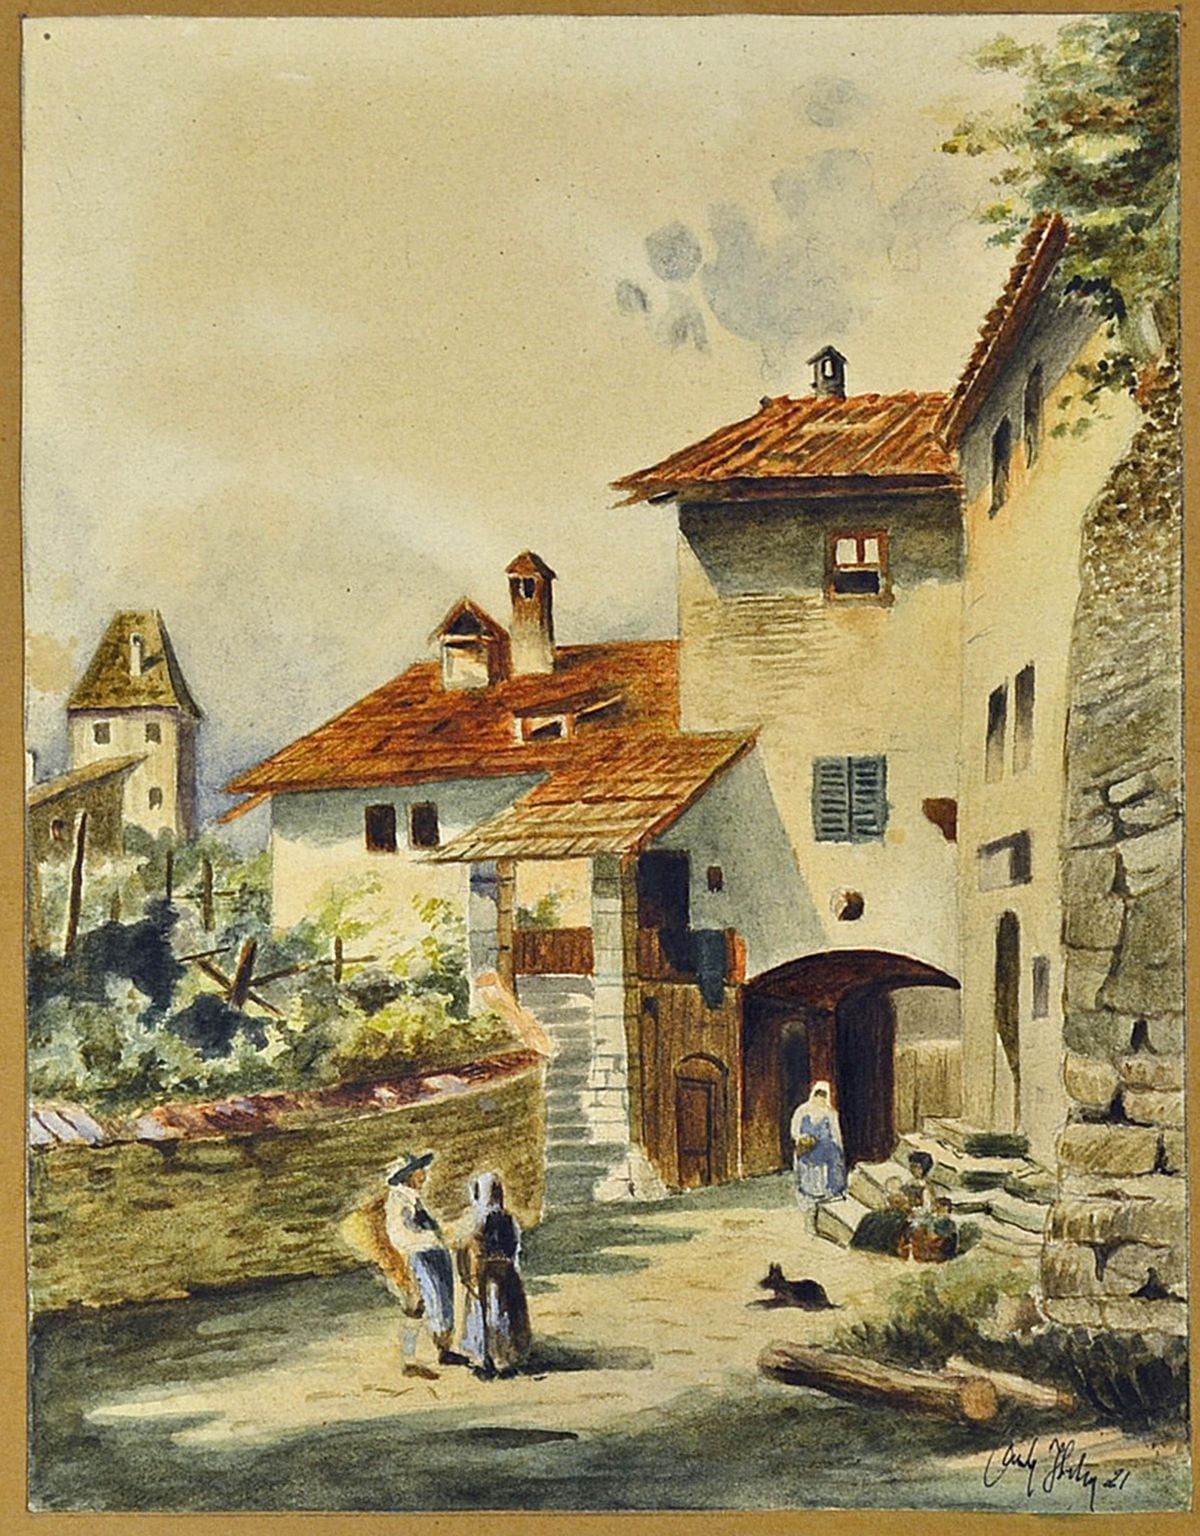 An artwork attributed to Adolf Hitler of the town gate at Drnstein in the Wachau valley